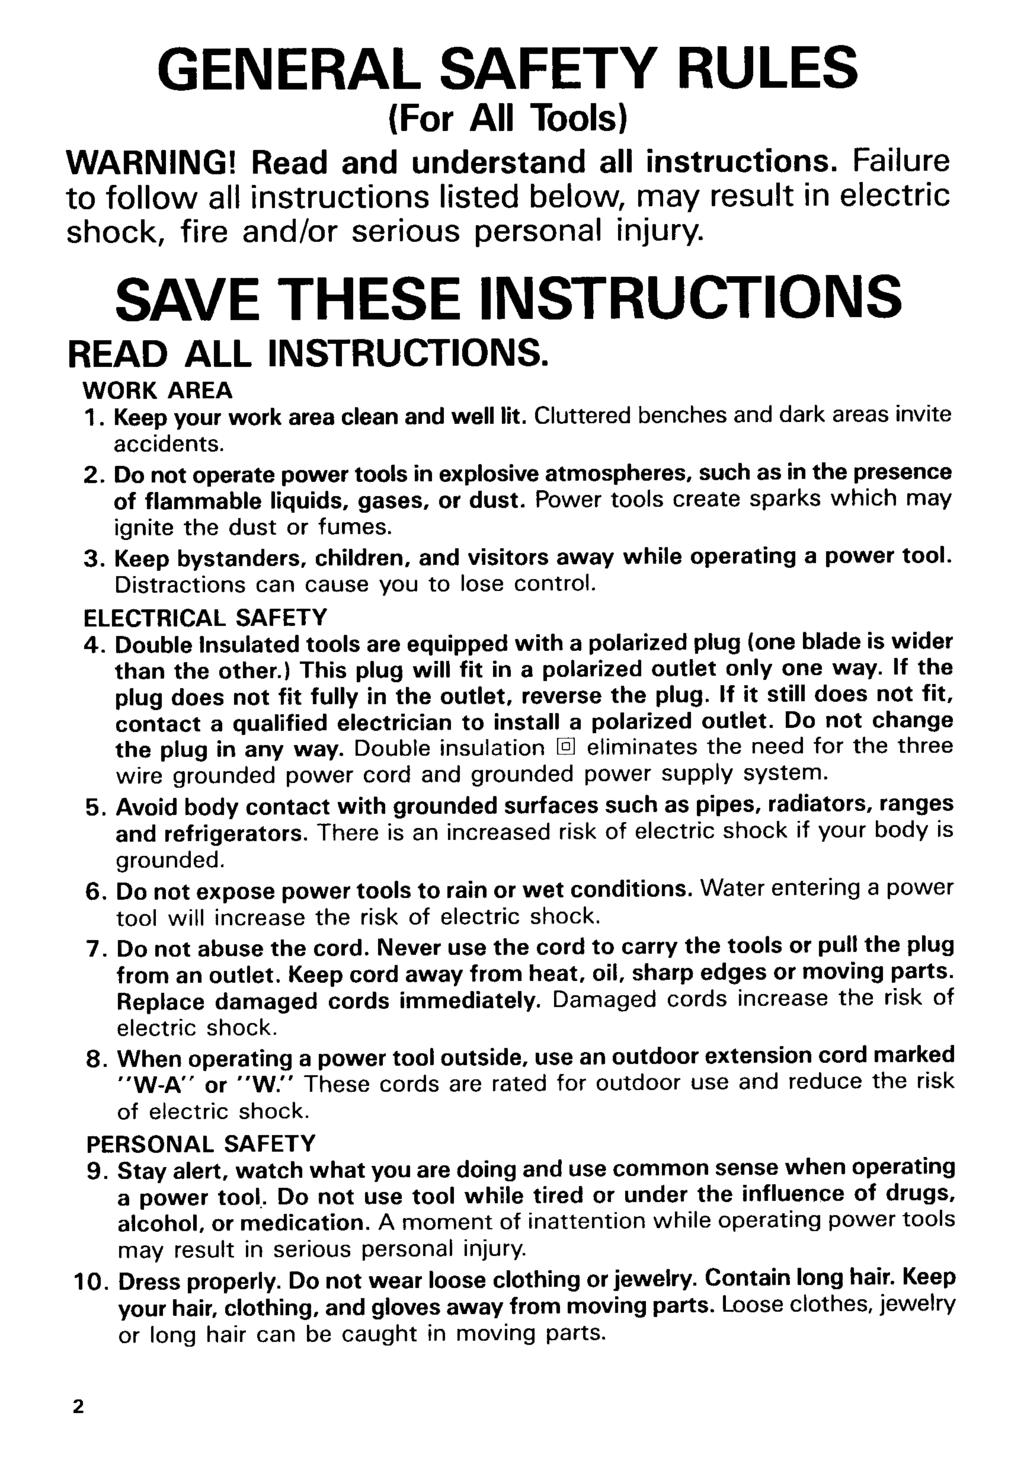 GENERAL SAFETY RULES (For All Tools) WARNNG! Read and understand all instructions. Failure to follow all instructions listed below, may result in electric shock, fire and/or serious personal injury.